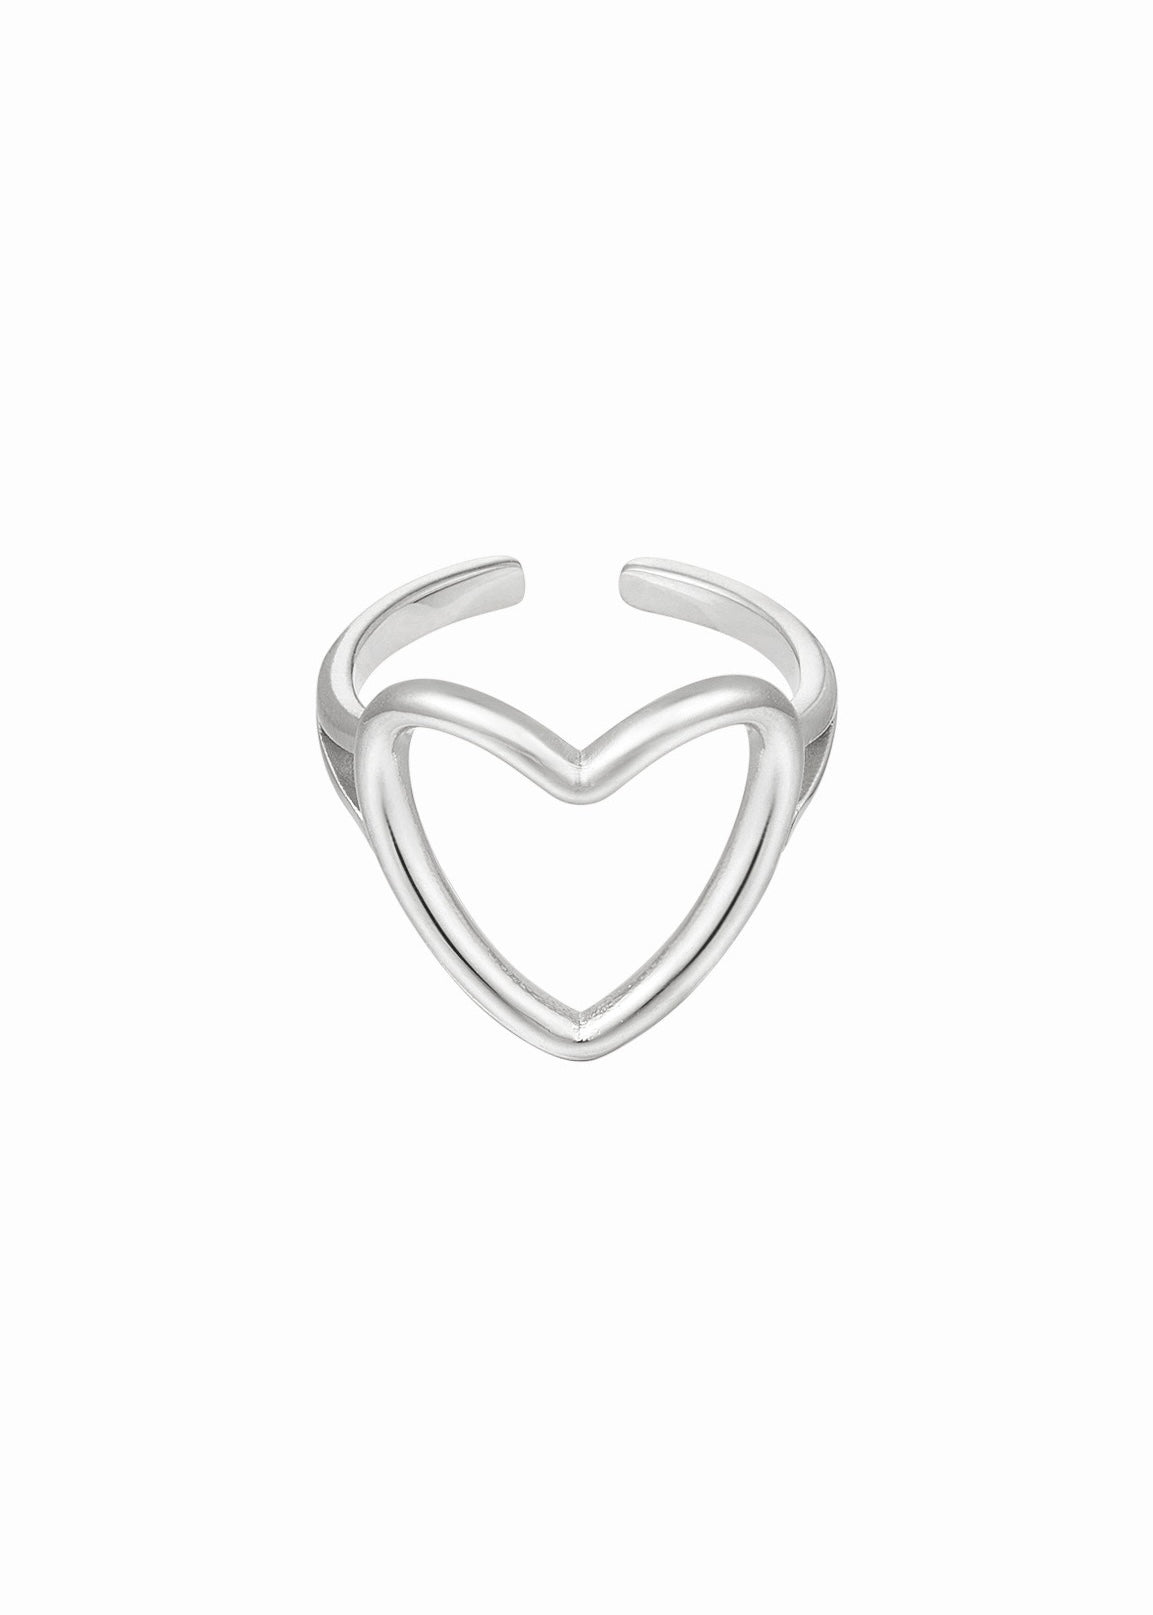 Amelie ring hart zilver - Styles And More